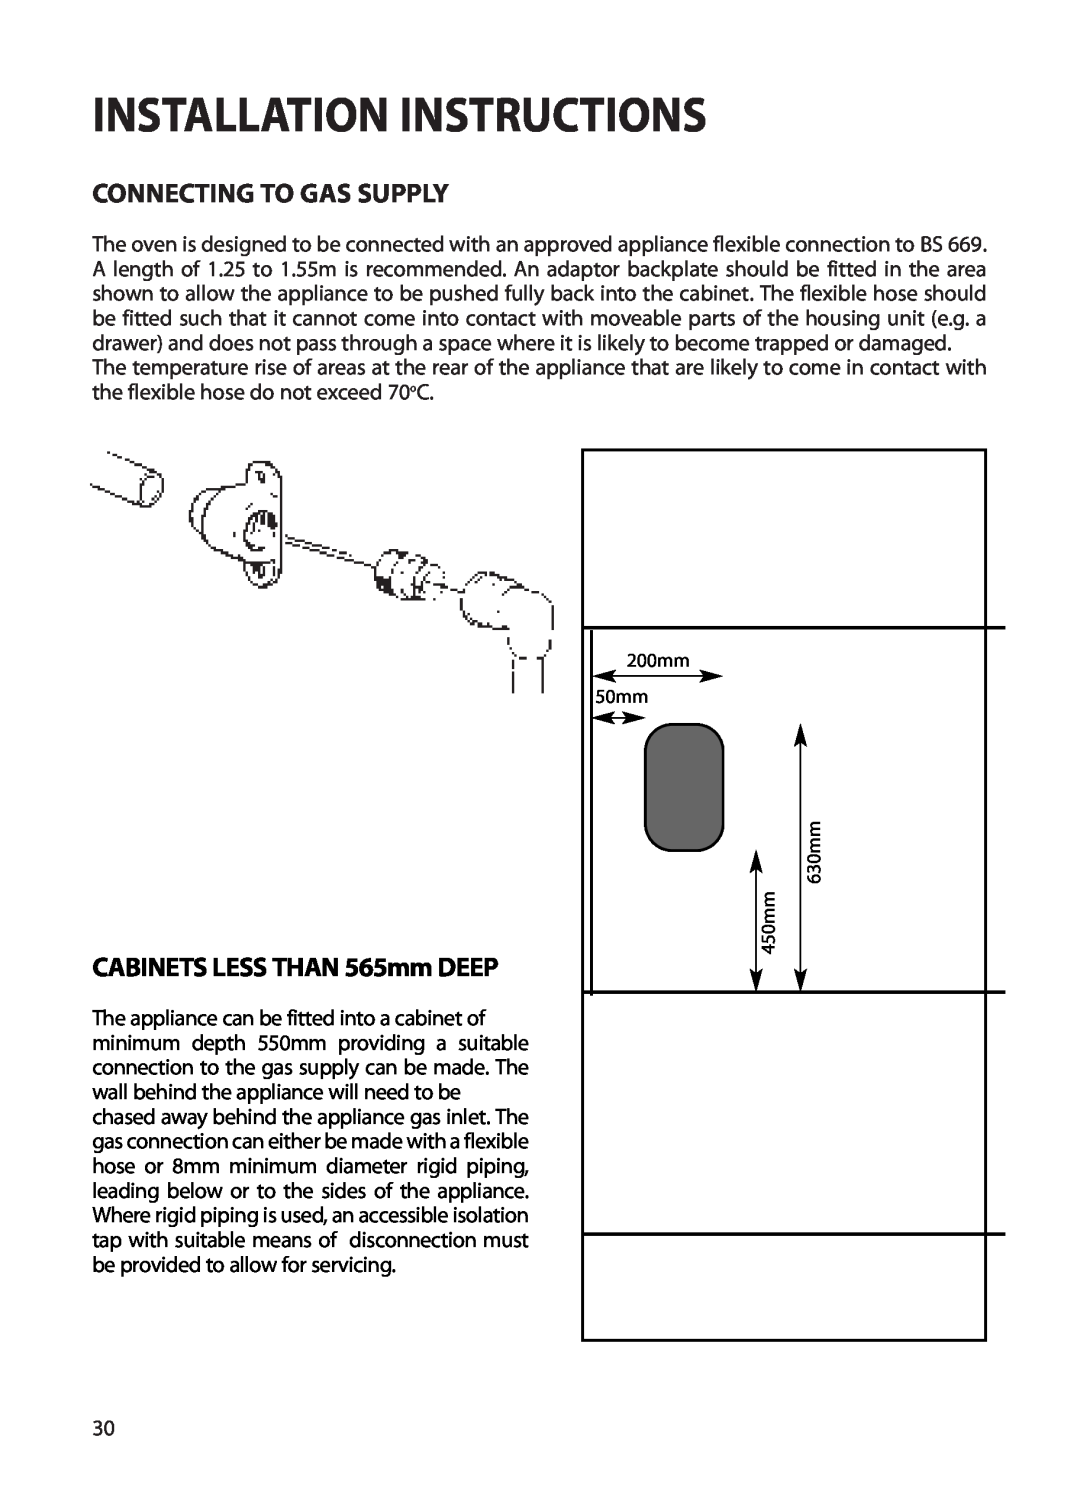 Creda S230G installation instructions Installation Instructions, Connecting To Gas Supply, CABINETS LESS THAN 565mm DEEP 